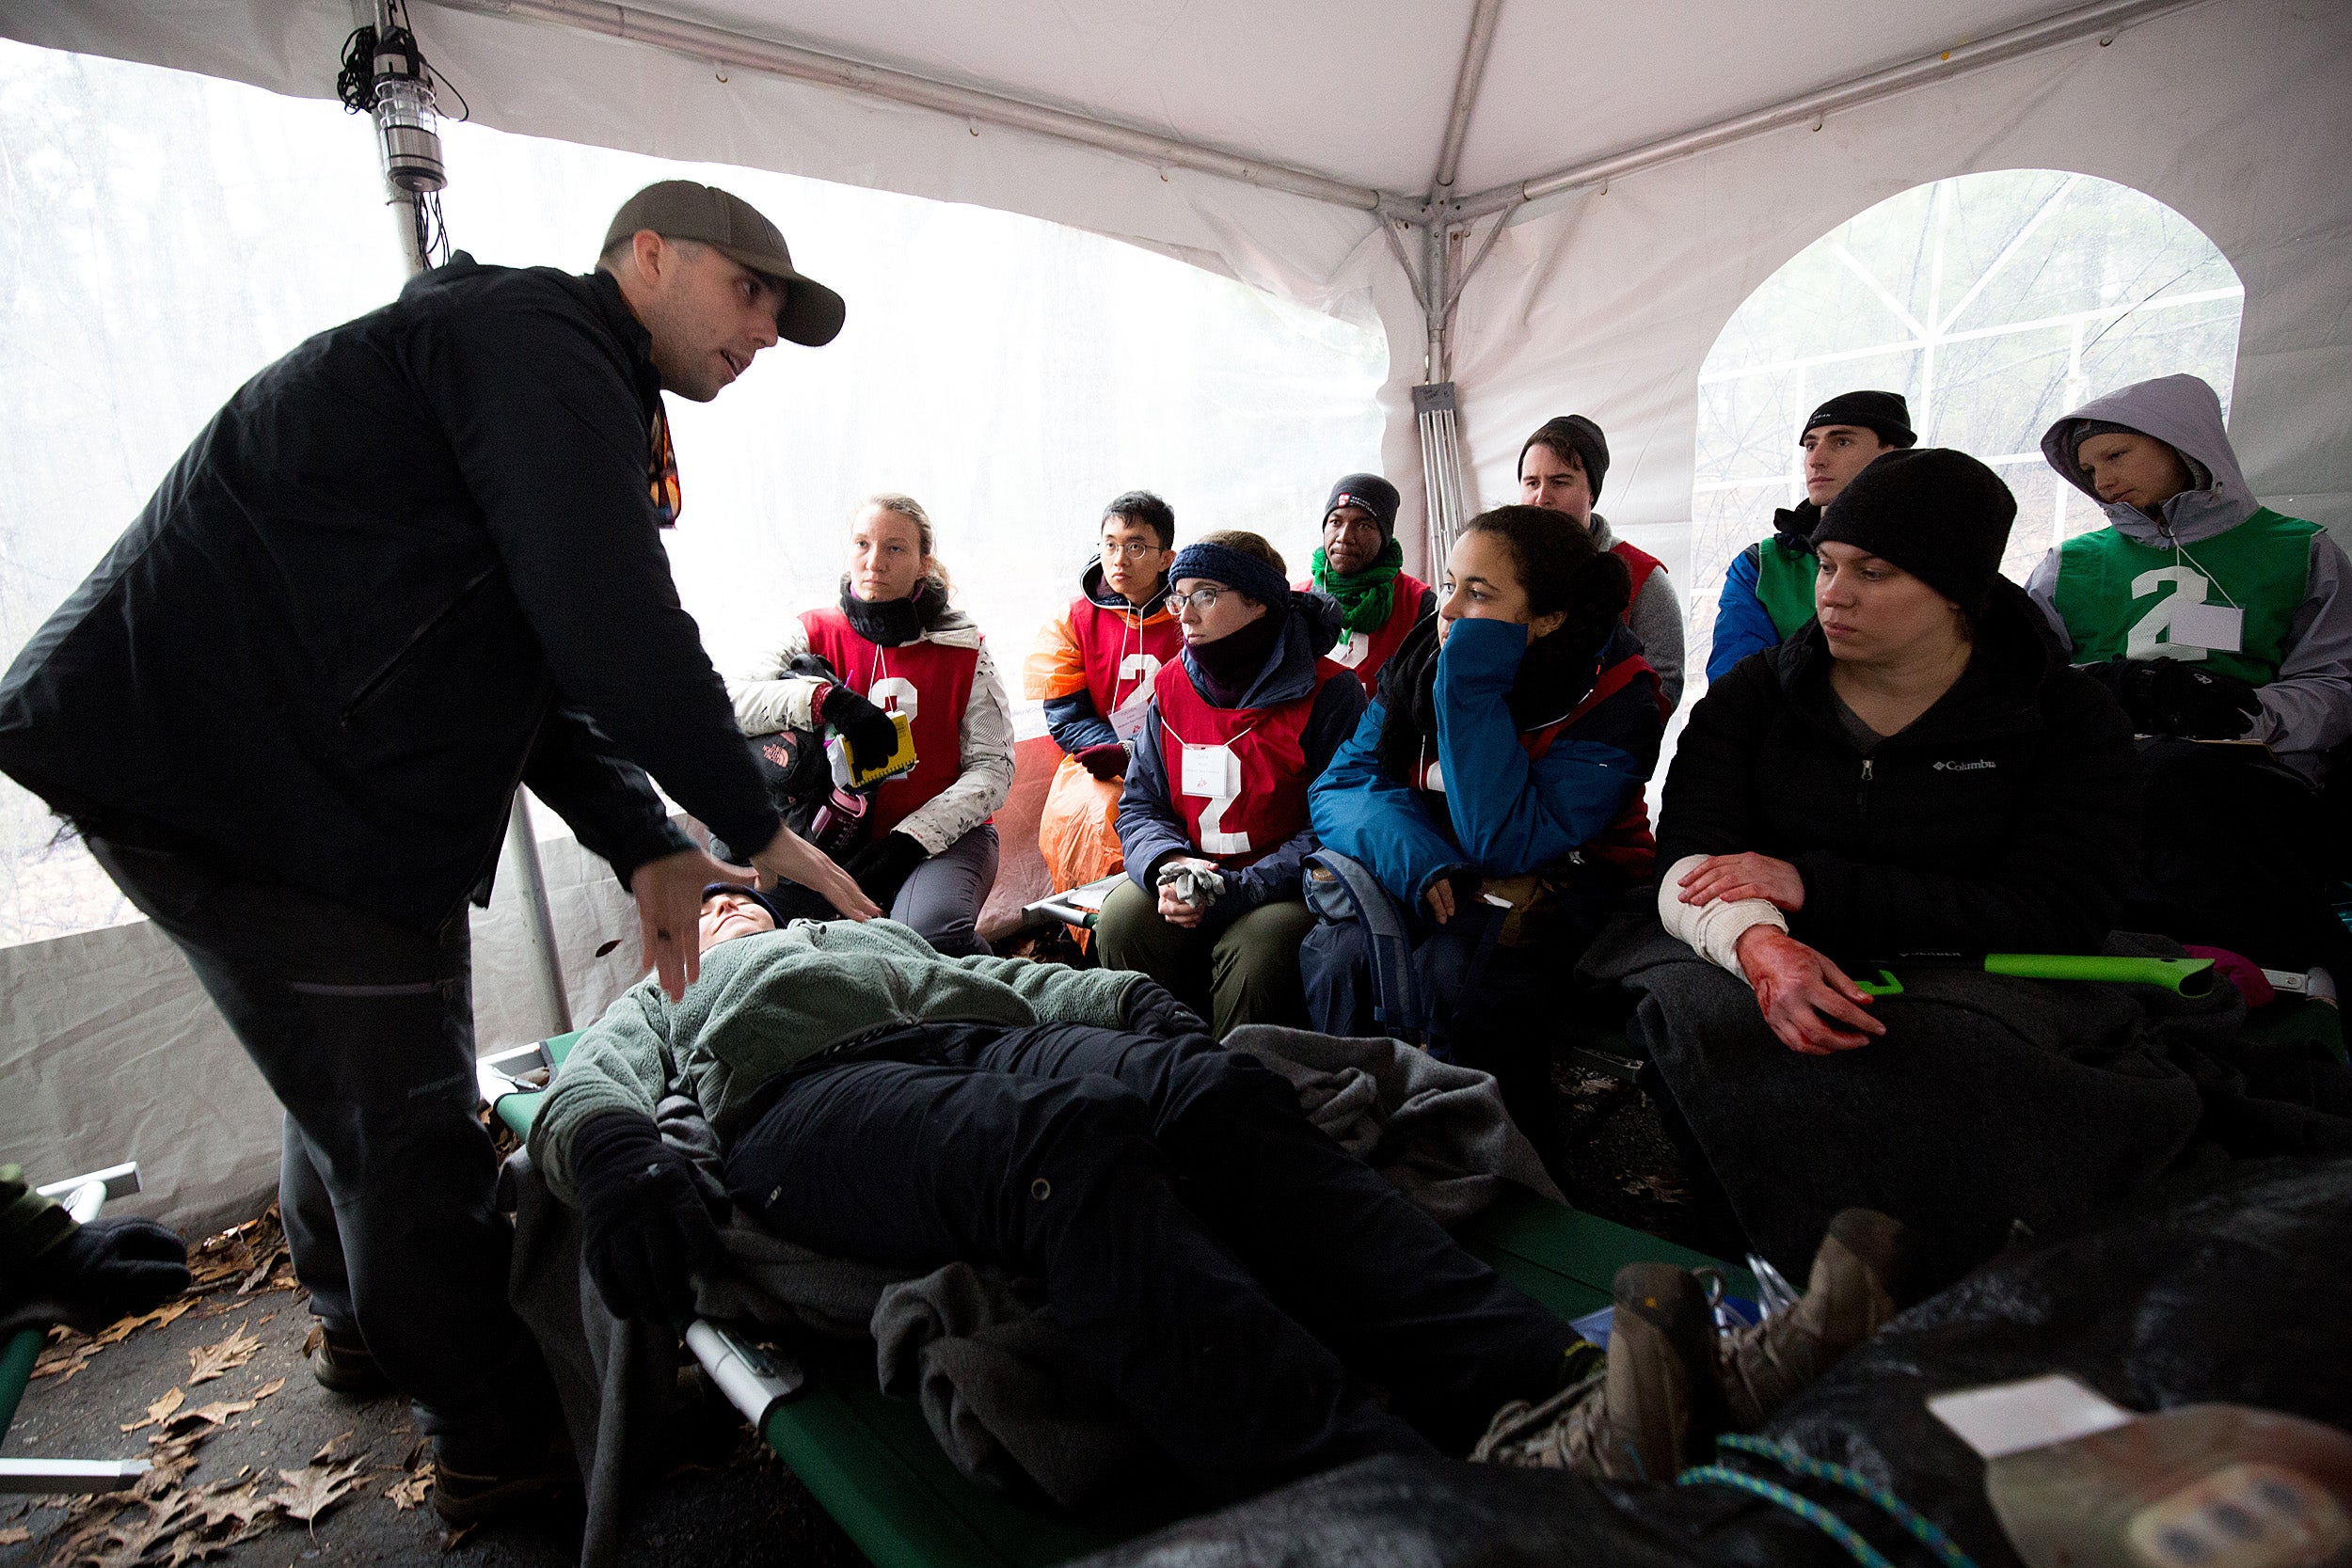 Participants learn to treat injuries in a humanitarian disaster simulation.